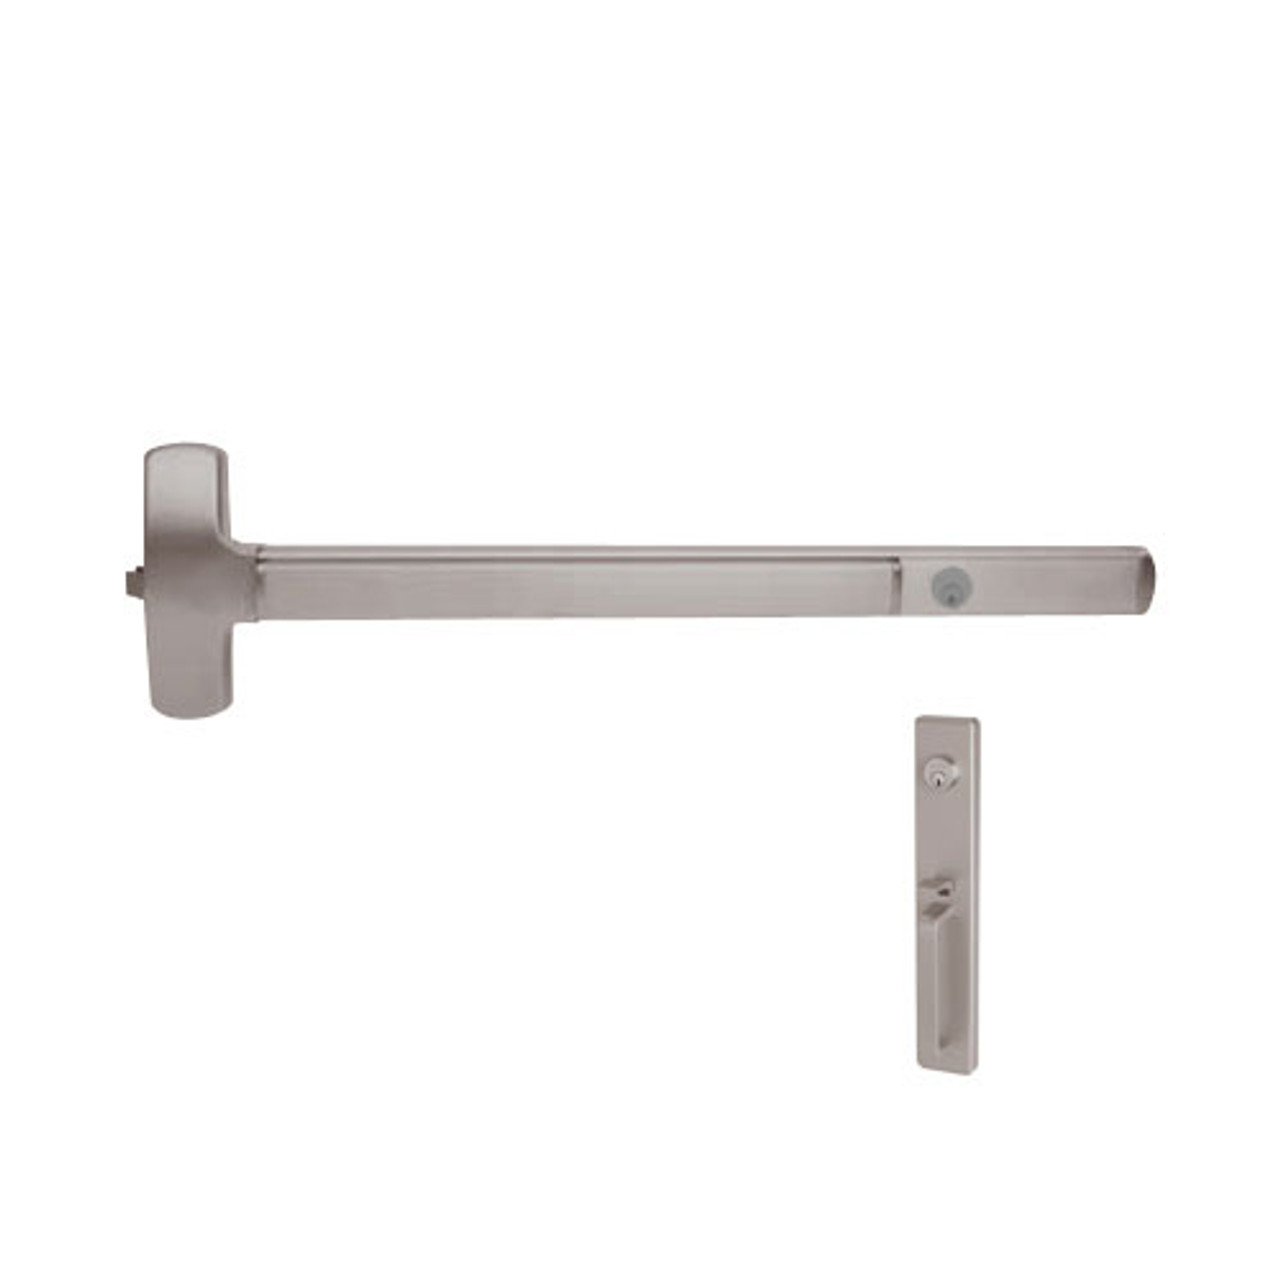 CD25-R-TP-US28-3 Falcon Exit Device in Anodized Aluminum